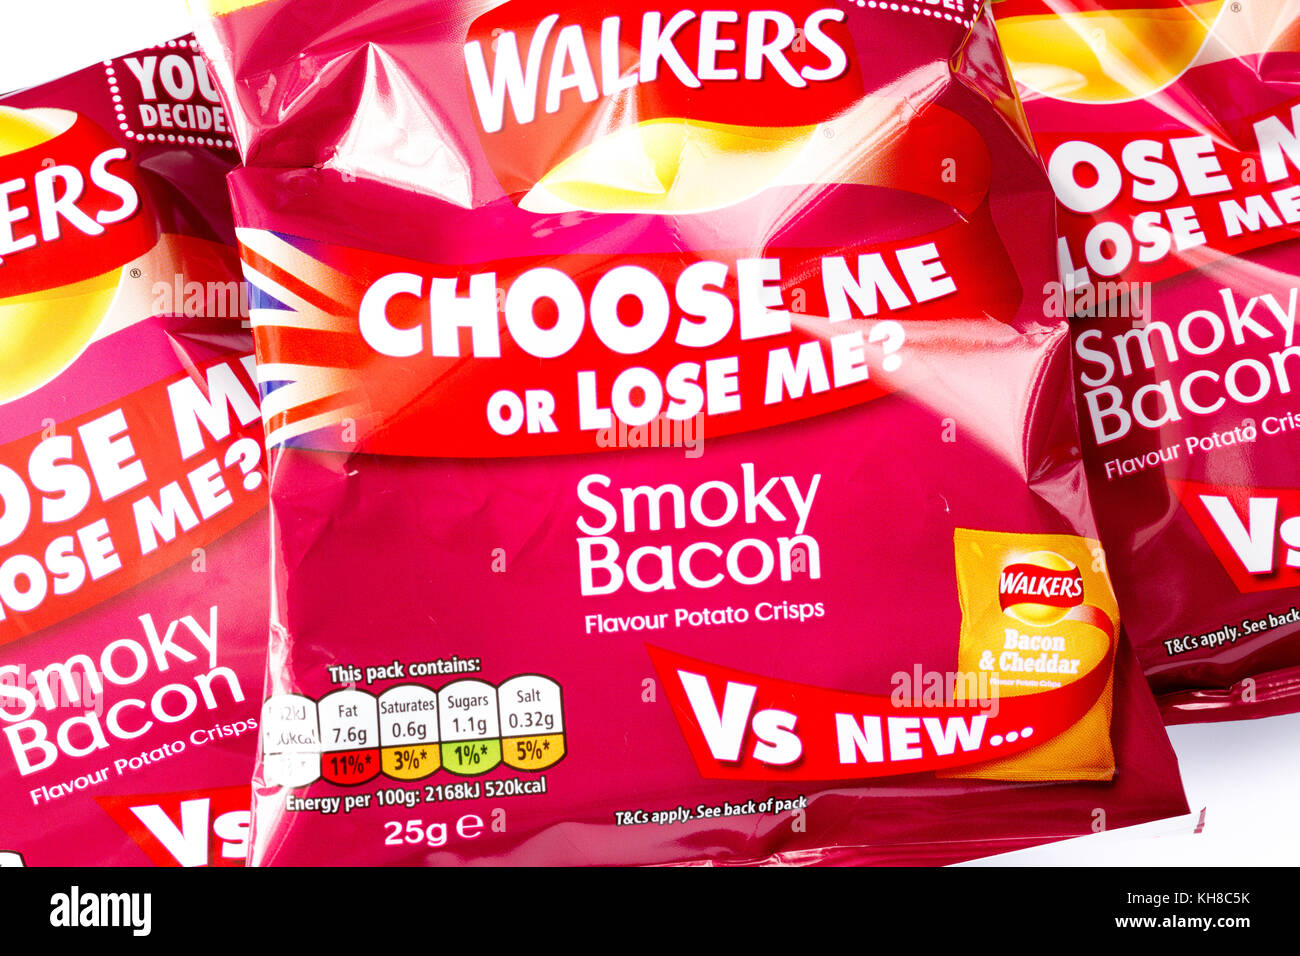 Packets of Walkers smoky bacon flavour crisps with the 'choose me or lose me?' slogan, November 2017, United Kingdom Stock Photo